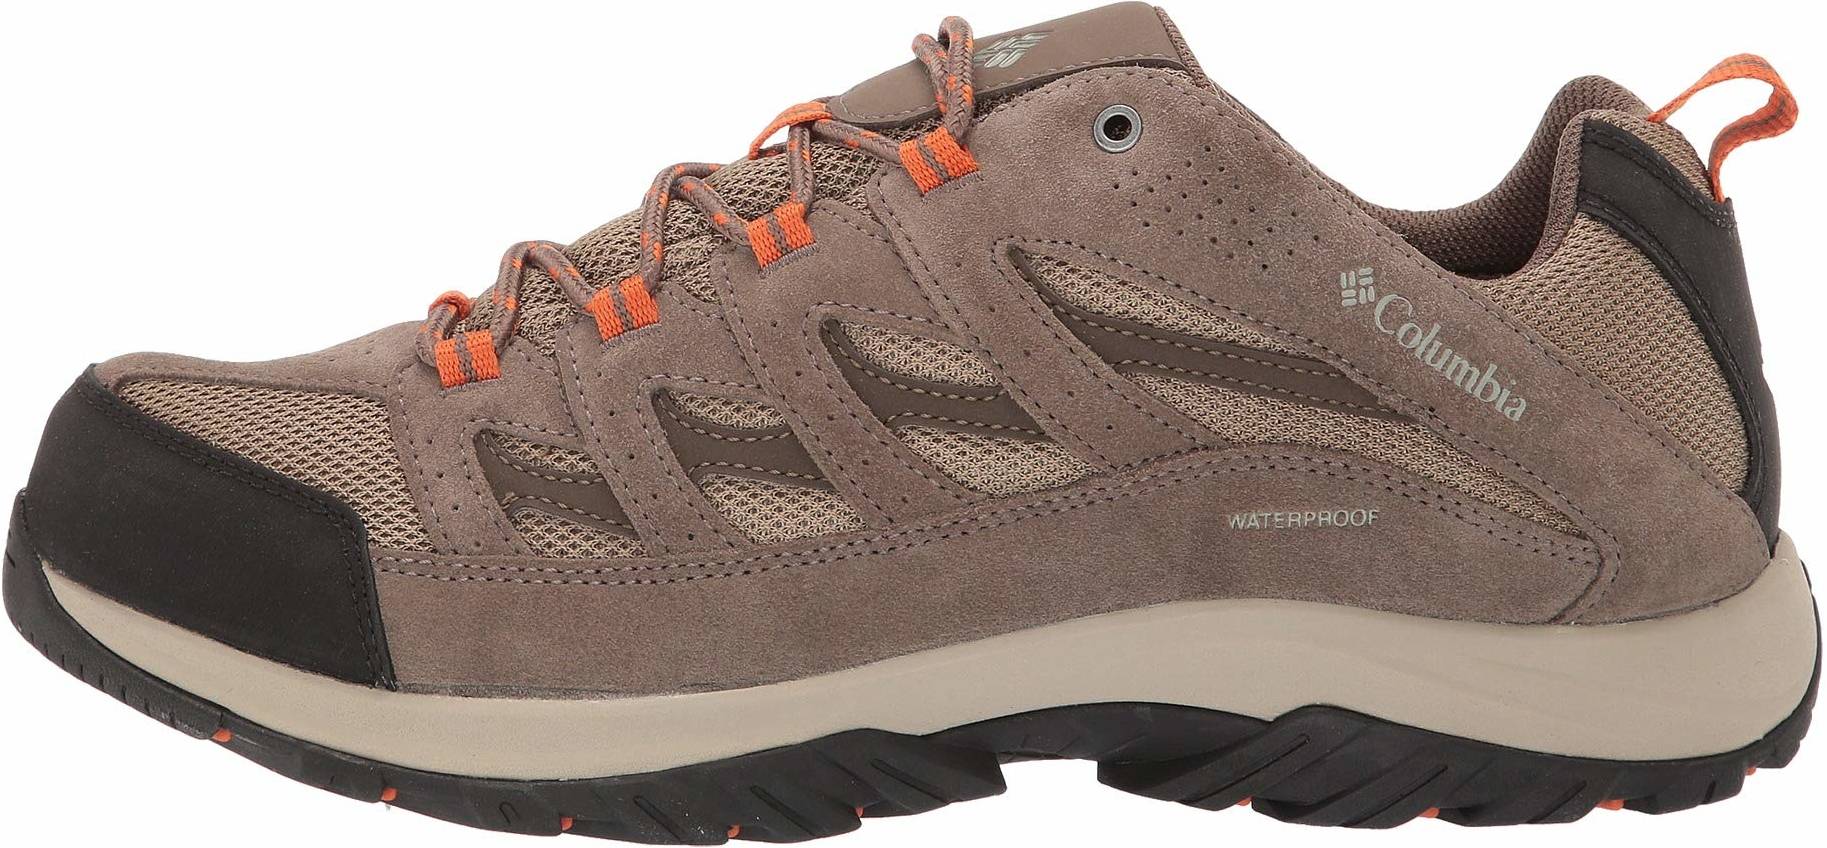 Save 25% on Wide Hiking Shoes (50 